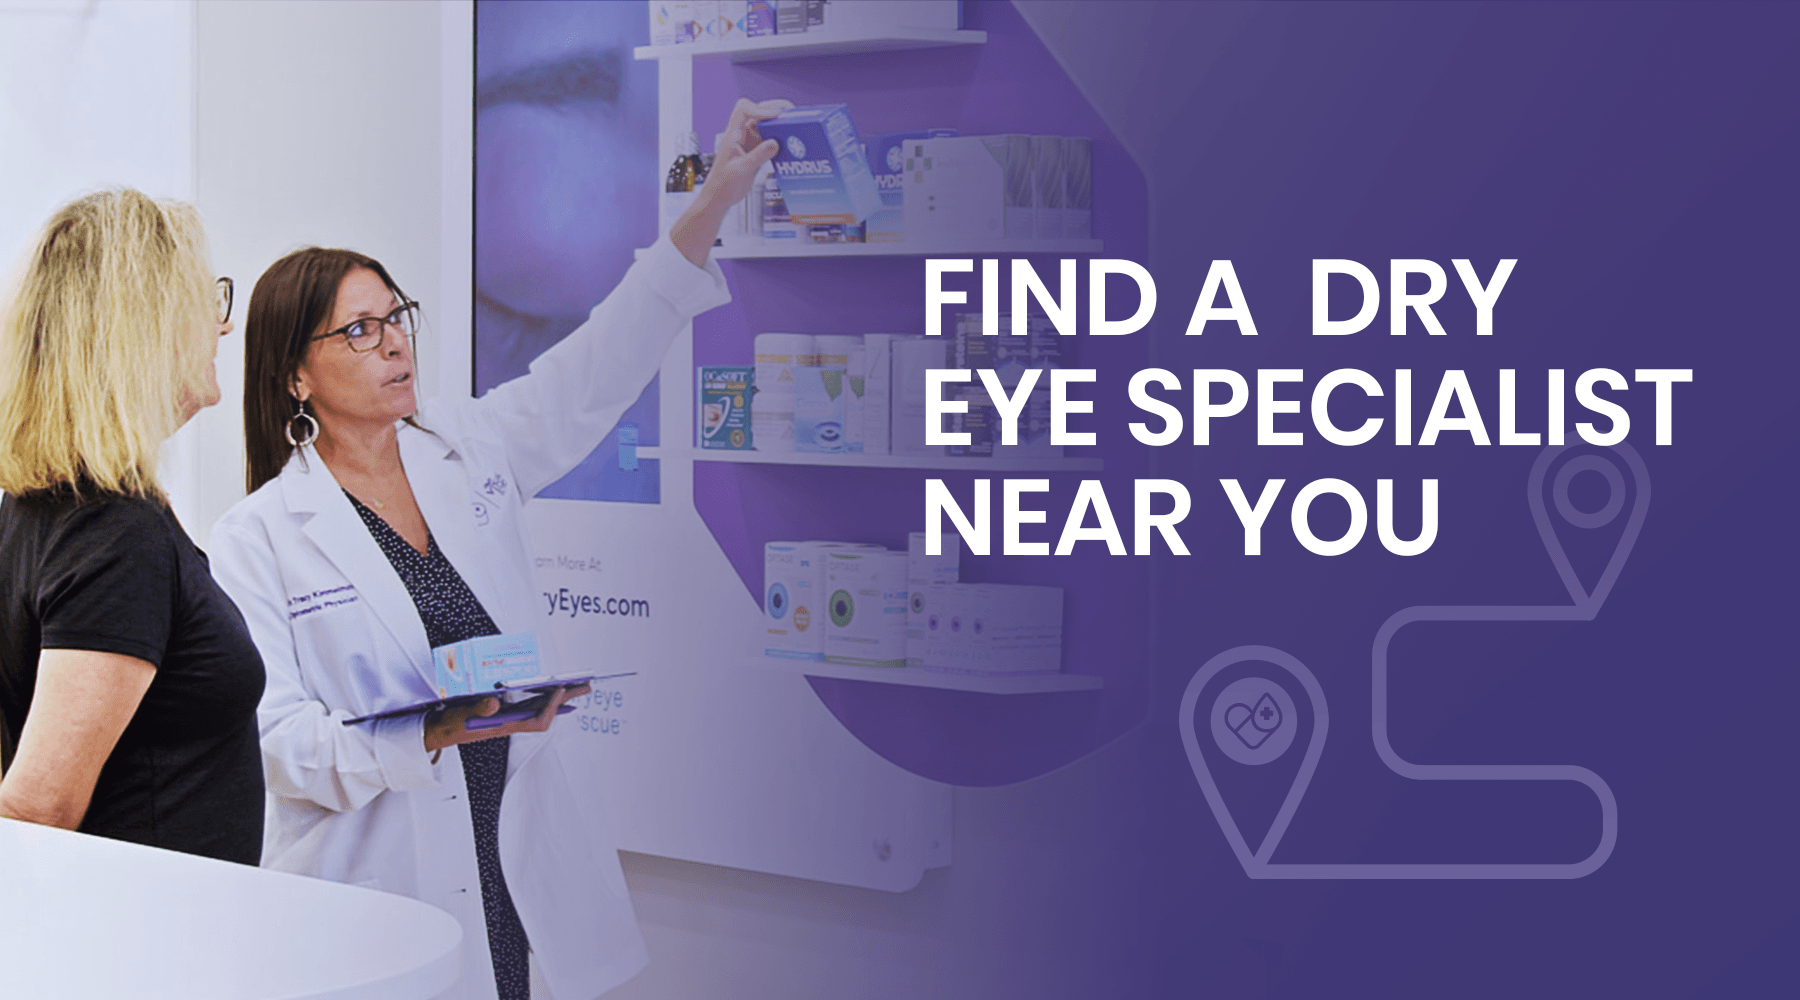 How to Find a Dry Eye Specialist Near You - Dryeye Rescue